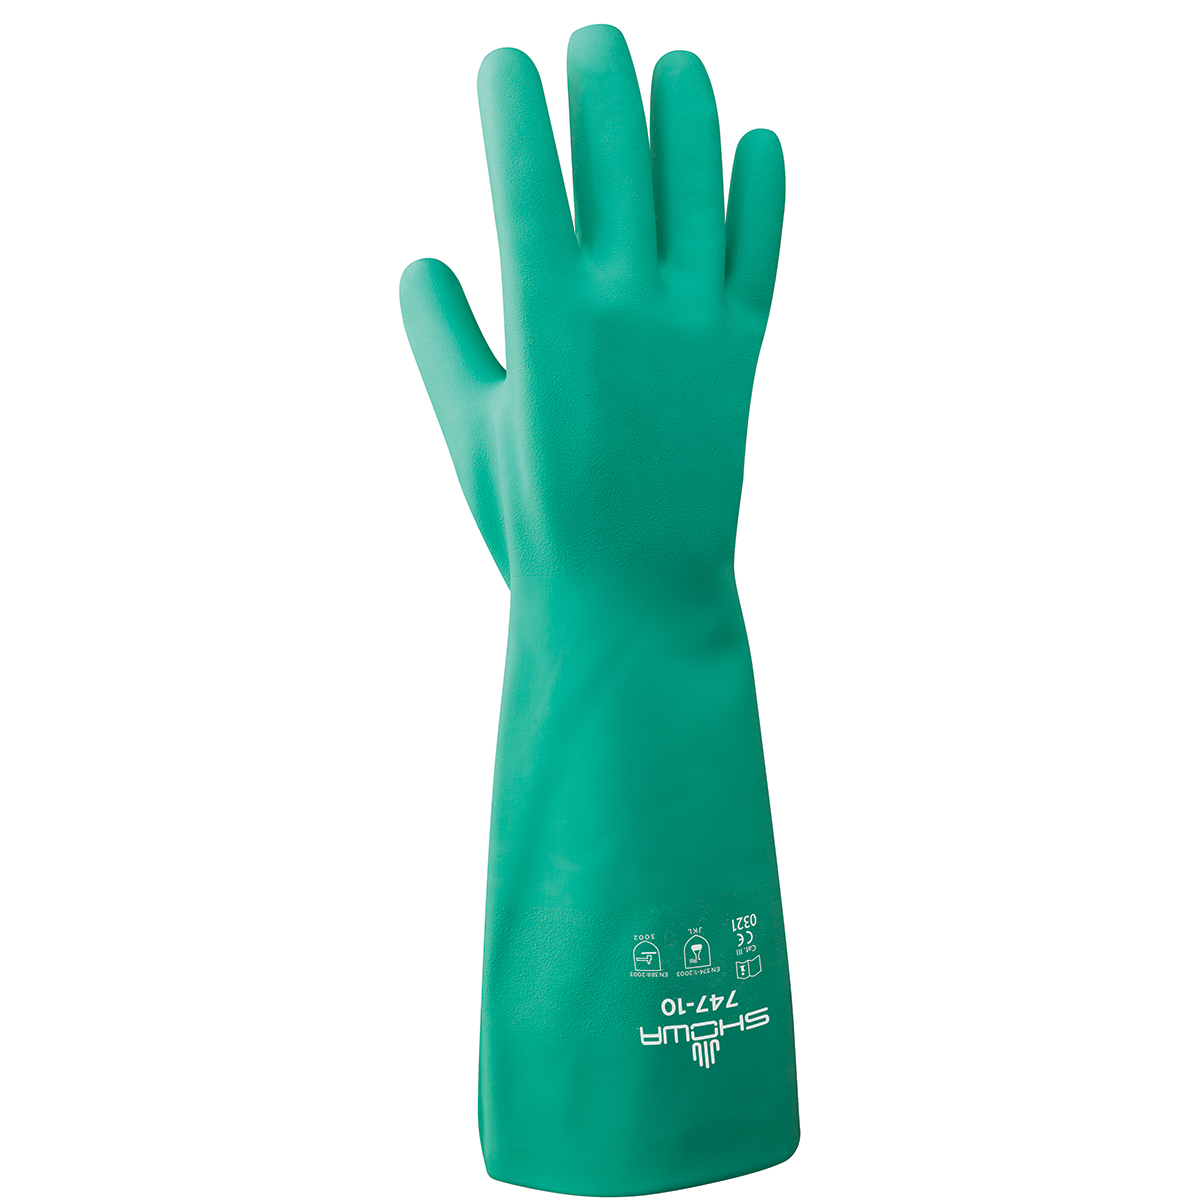 Chemical resistant unsupported nitrile, 19", 22-mil, light green, bisque finish, unlined, small